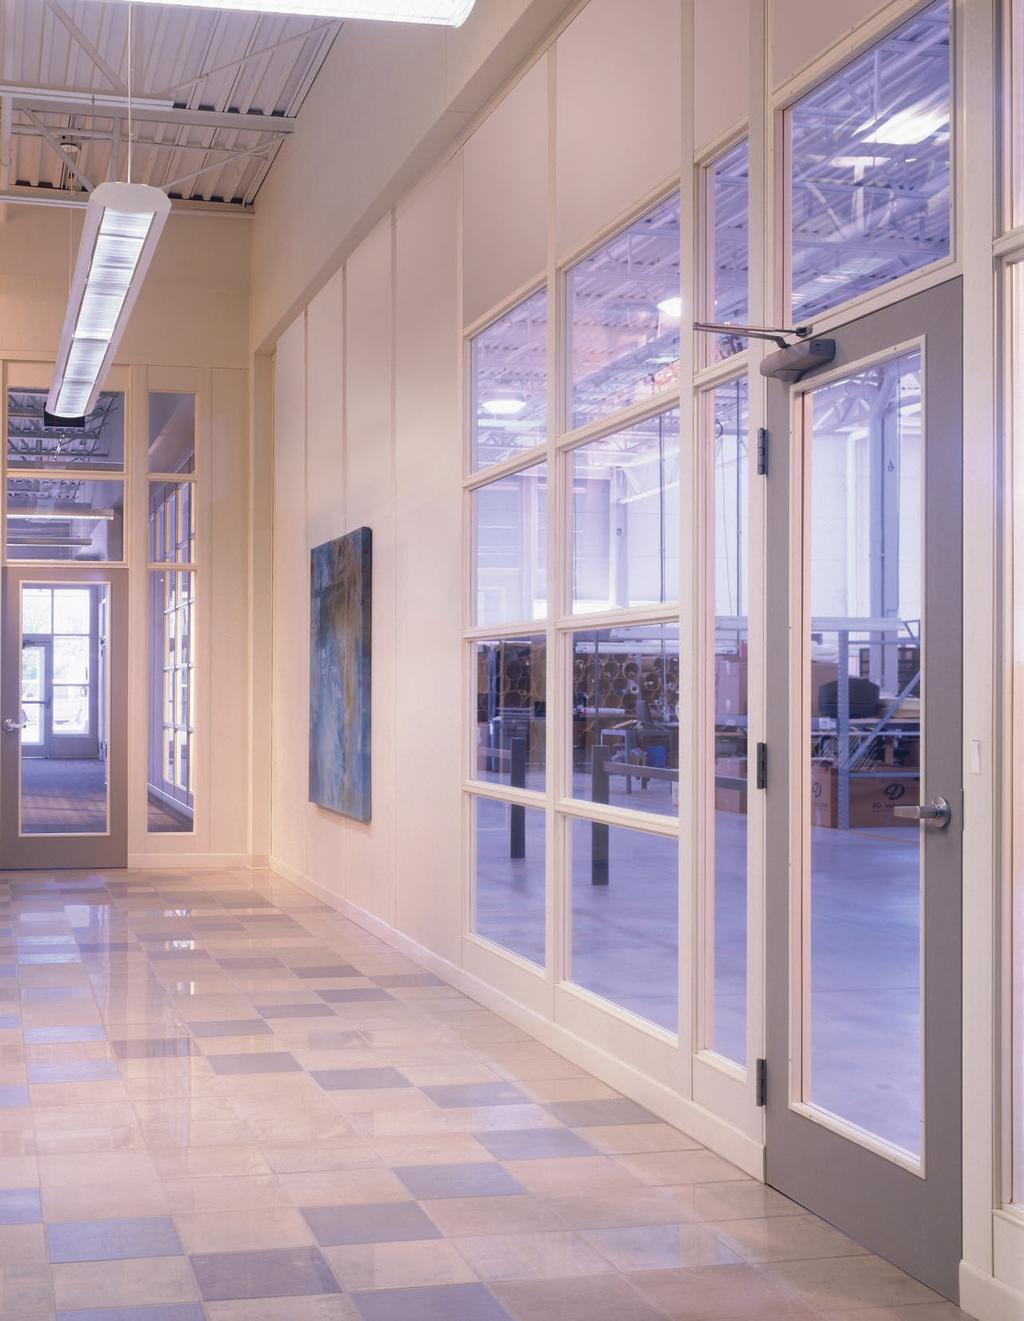 For over 45 years, TrendWall has been used in floor-to-ceiling applications around the